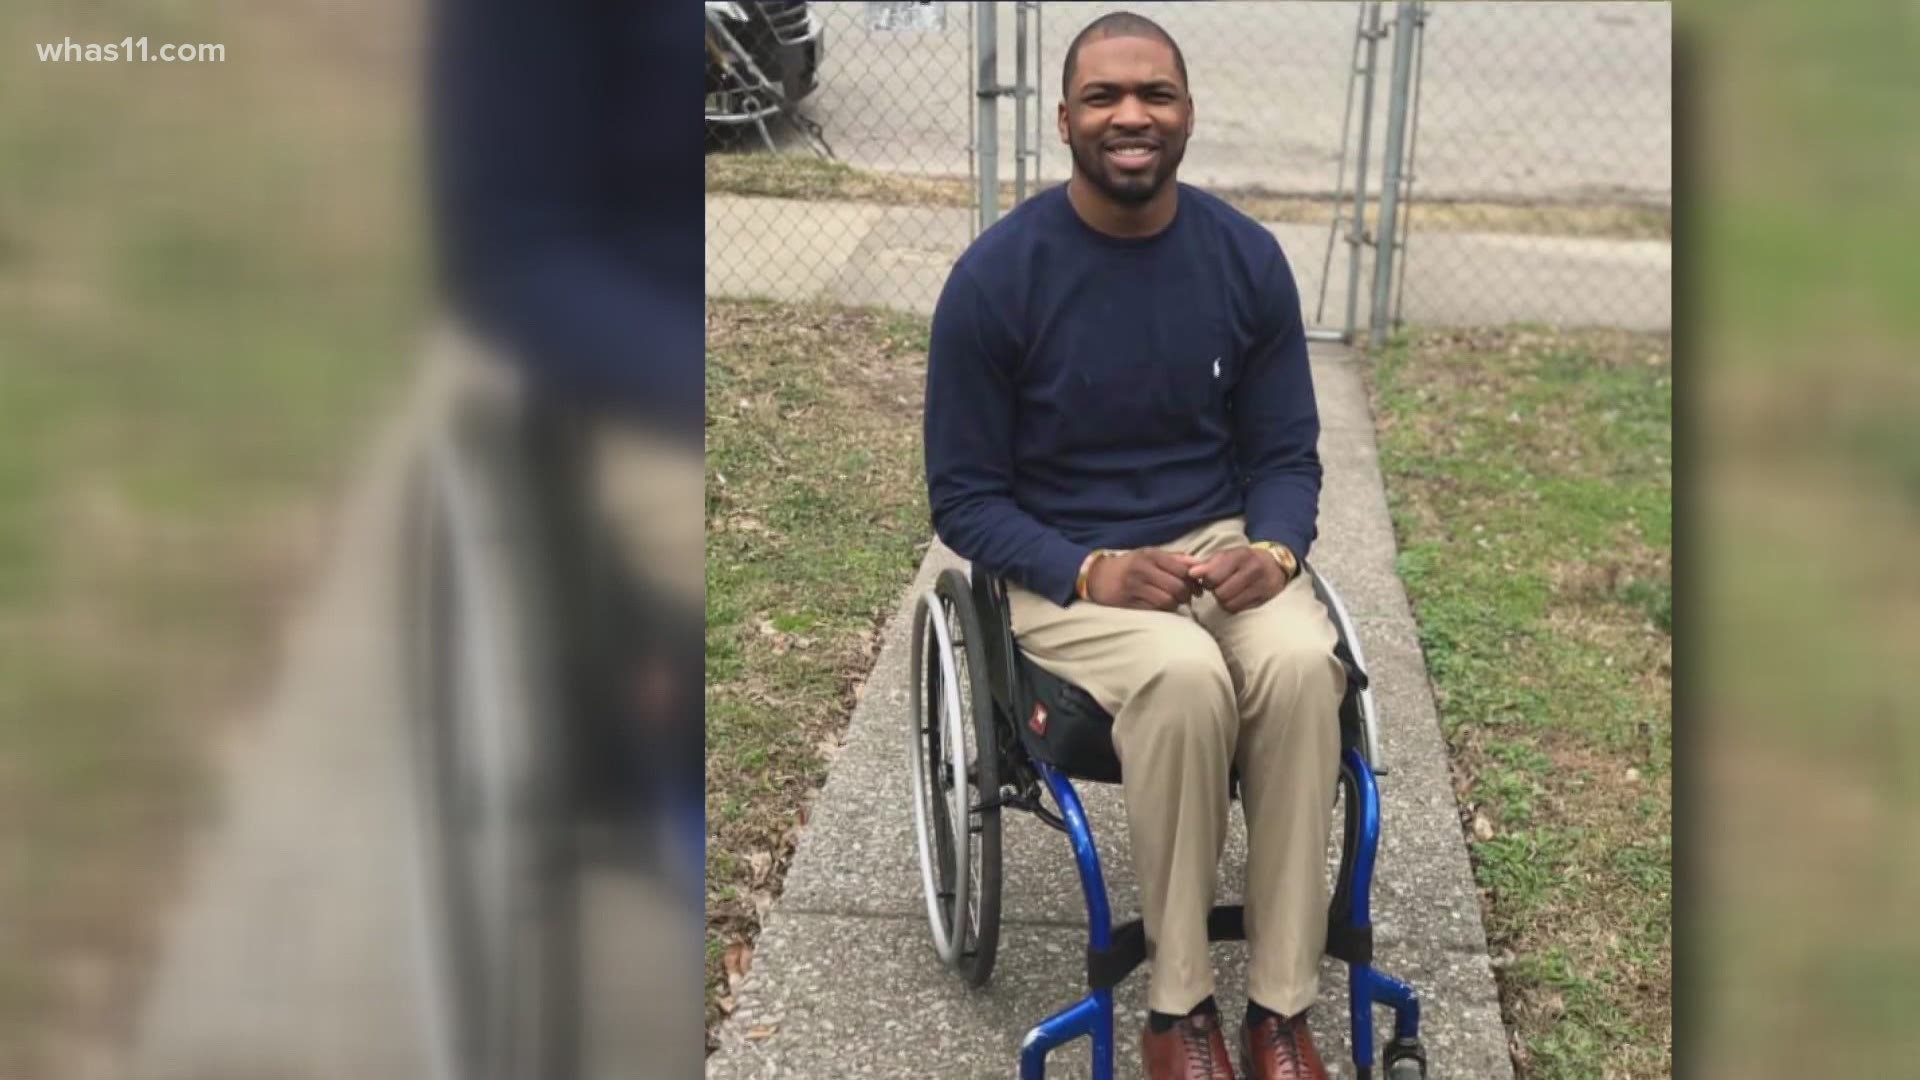 Terrell Williams was a victim of 2017 shooting in the Shawnee neighborhood. After a long road to recovery, he now spends his time helping other shooting victims.